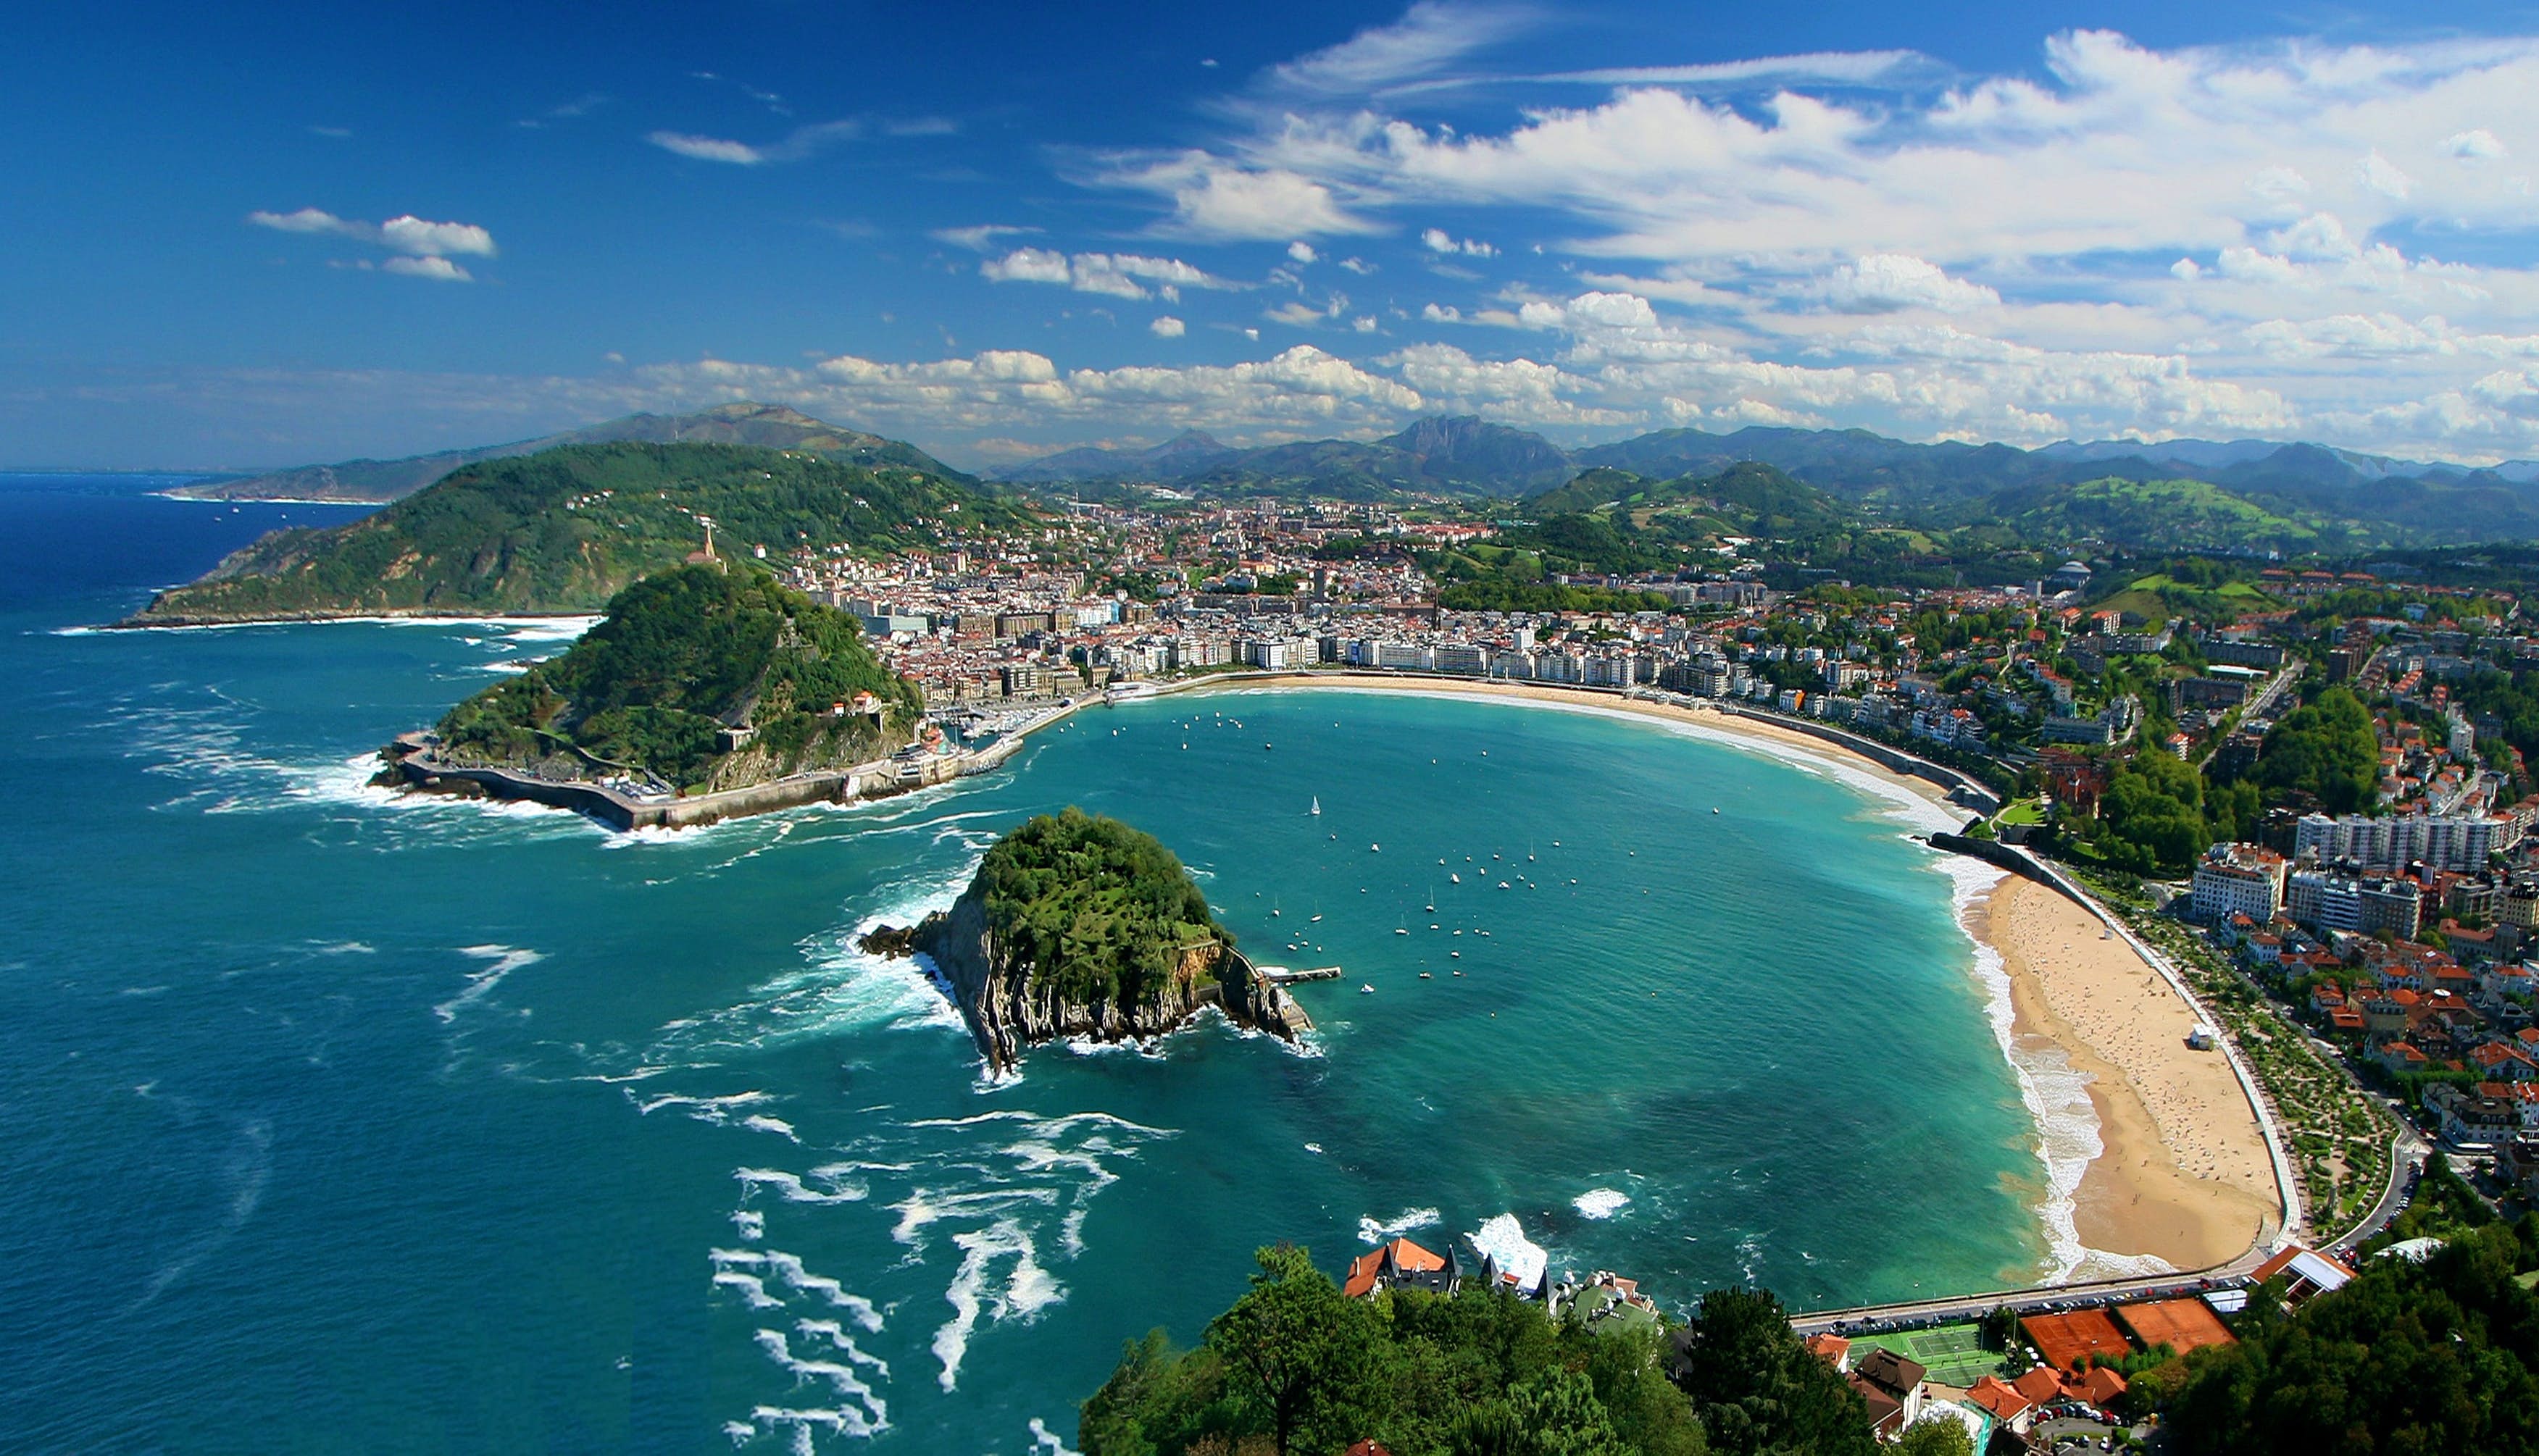 The best food in Spain is known to be found in san sebastián